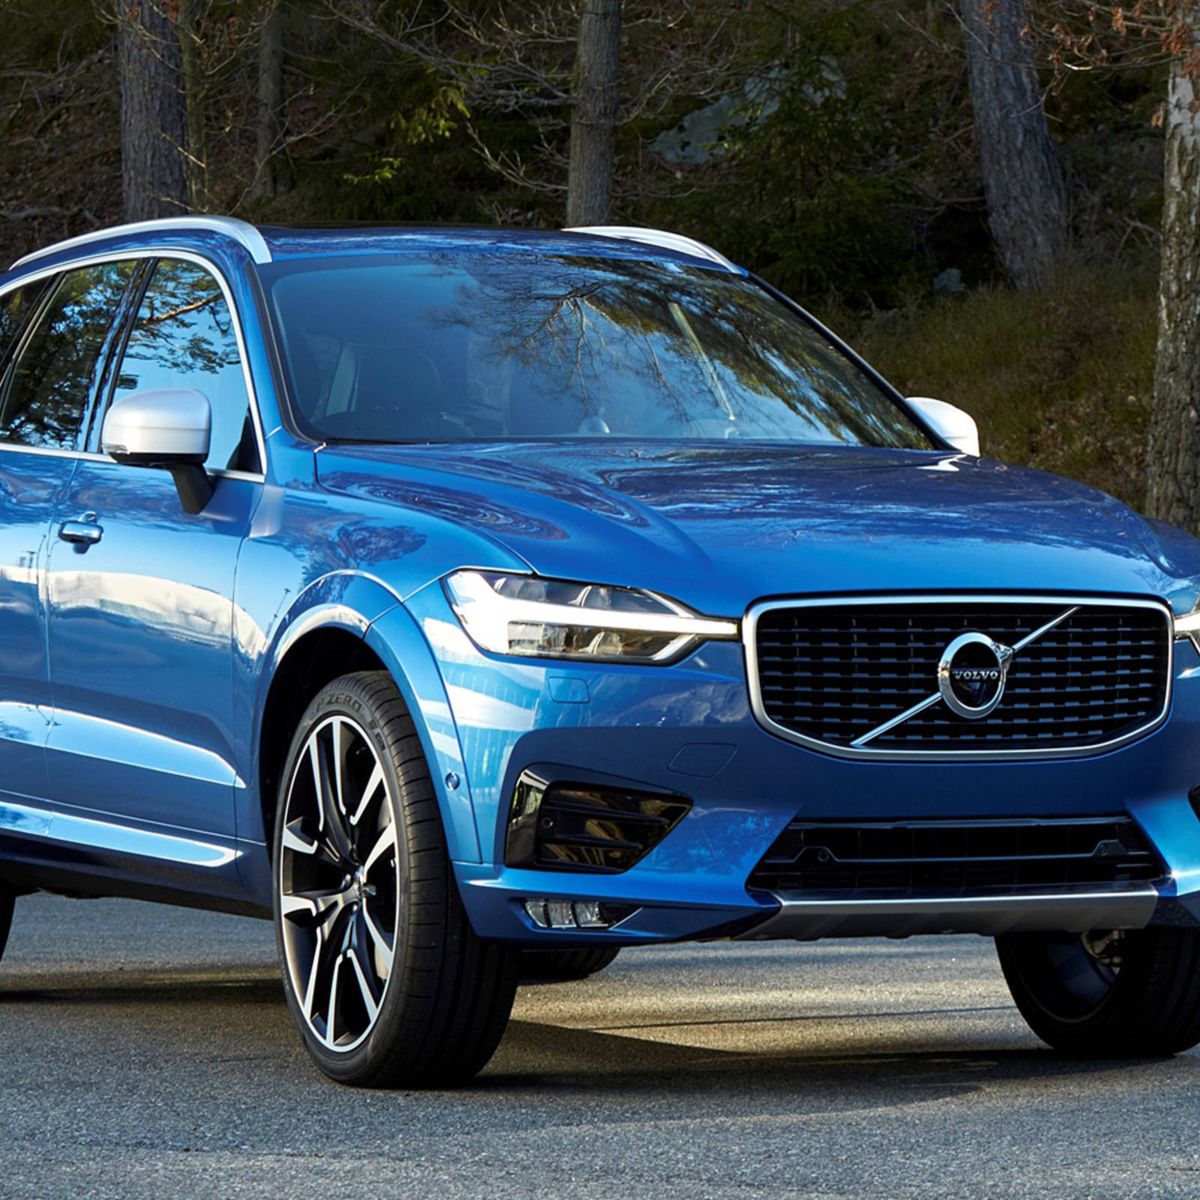 2018 Volvo XC60 enters production with a lot riding on its shoulders - CNET